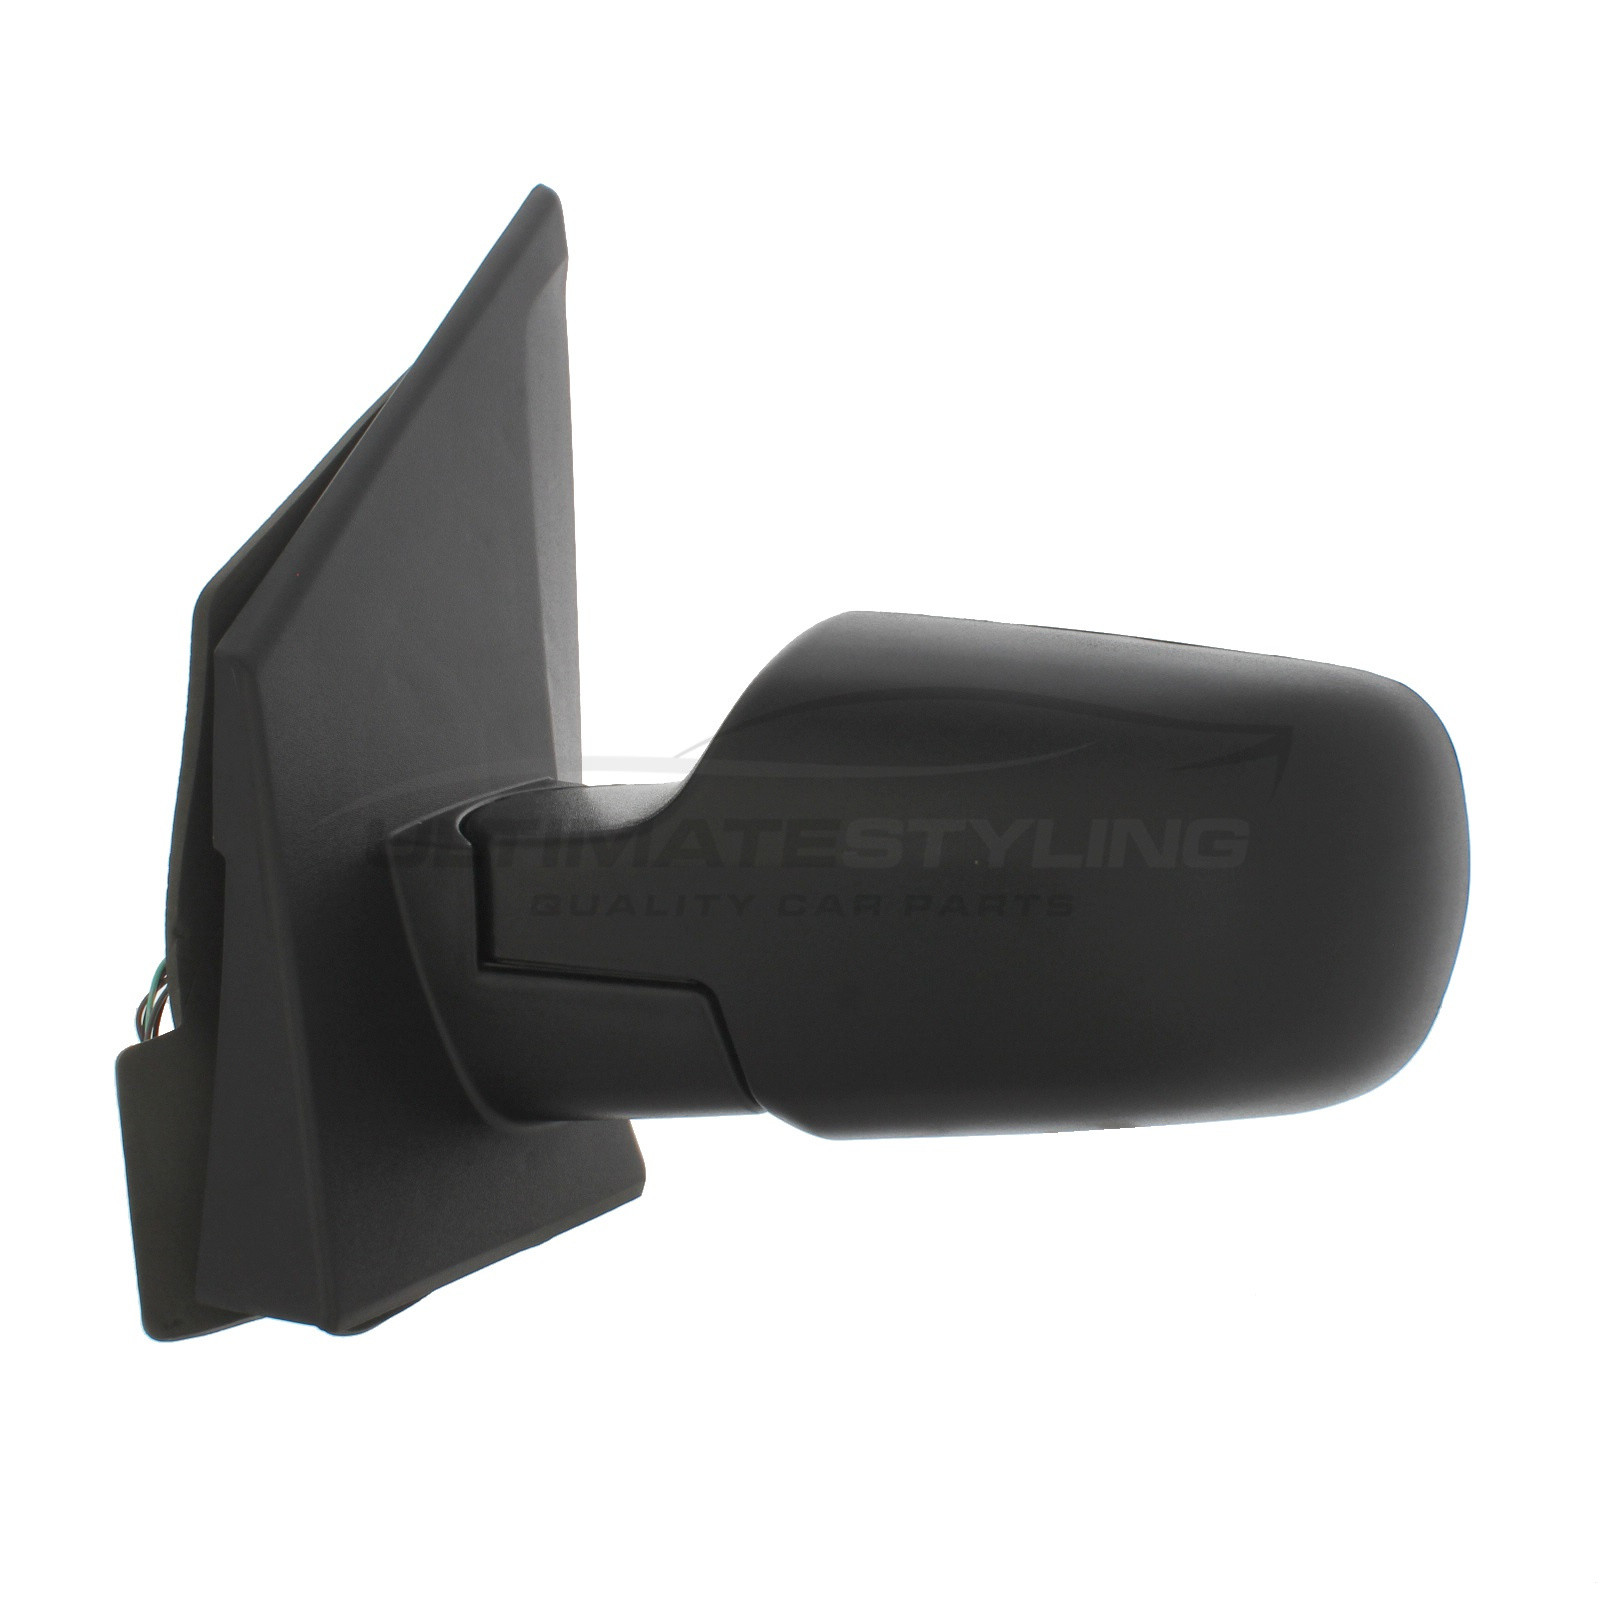 Ford Fusion Wing Mirror / Door Mirror - Passenger Side (LH) - Electric adjustment - Heated Glass - Black